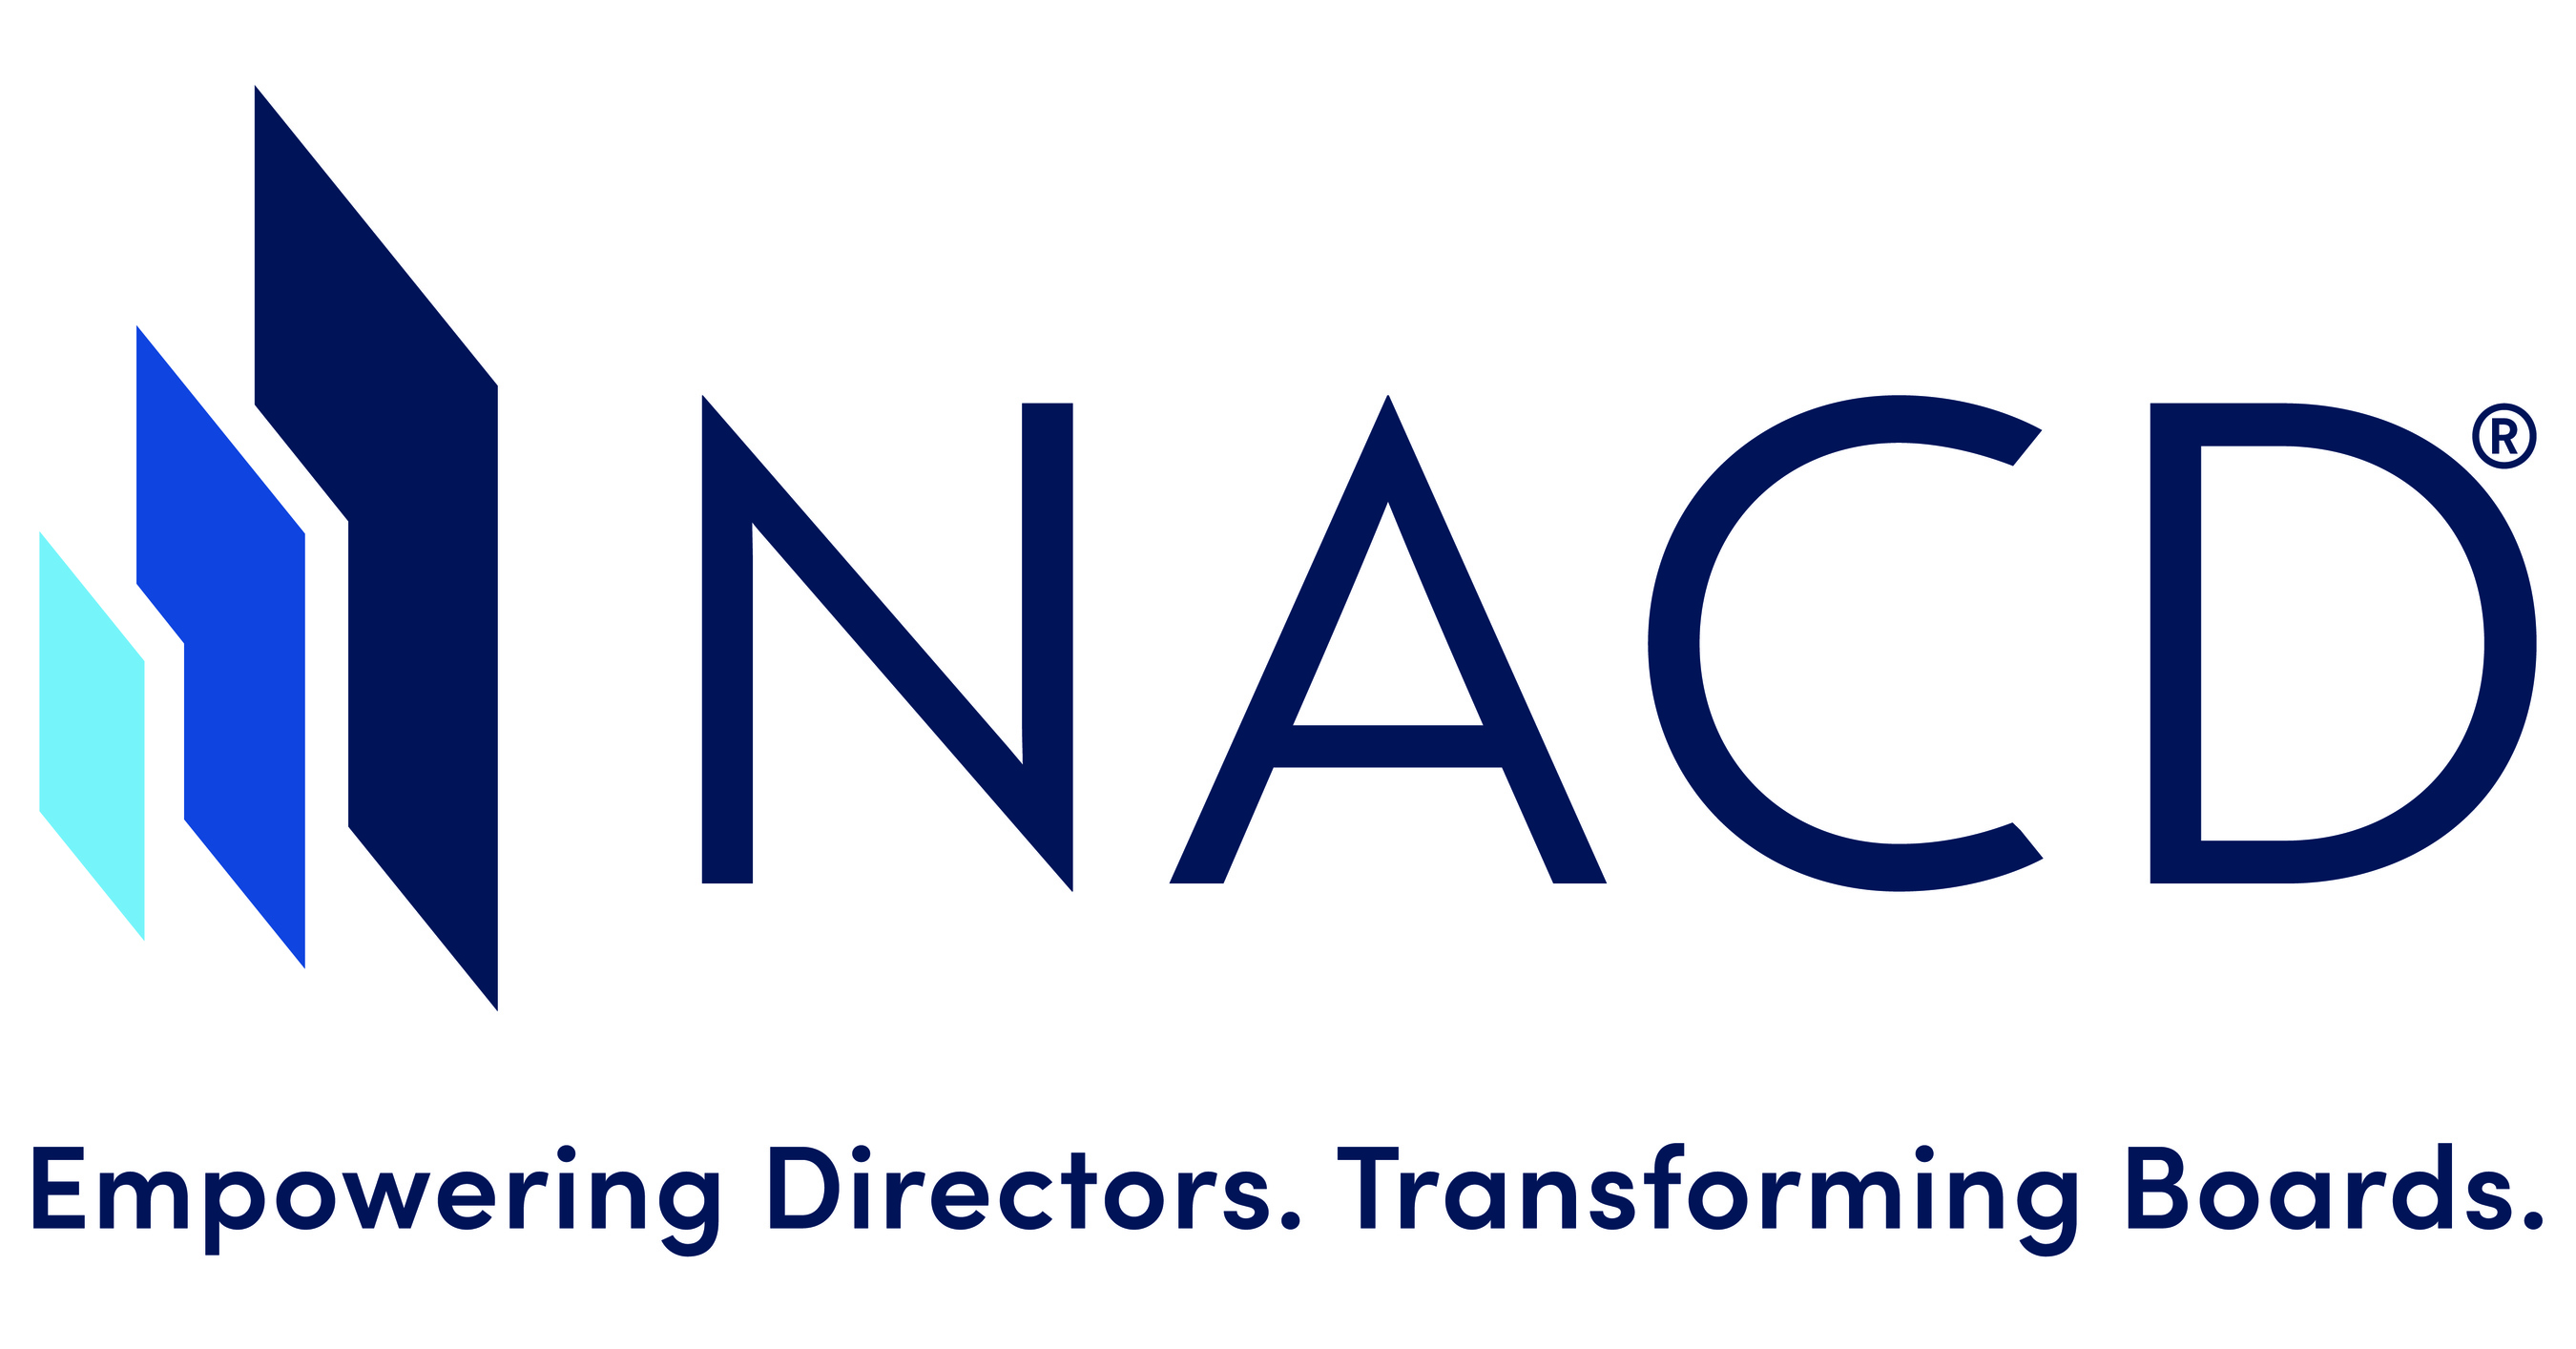 RUCHIR SHARMA, DANIEL LUBETZKY, JENNIFER GOLBECK, ROGER FERGUSON, JEN EASTERLY, AND ADMIRAL JAMES STAVRIDIS, US NAVY (RET.), LEAD A POWERFUL LINEUP OF SPEAKERS FOR THE 2022 NACD SUMMIT THIS WEEK